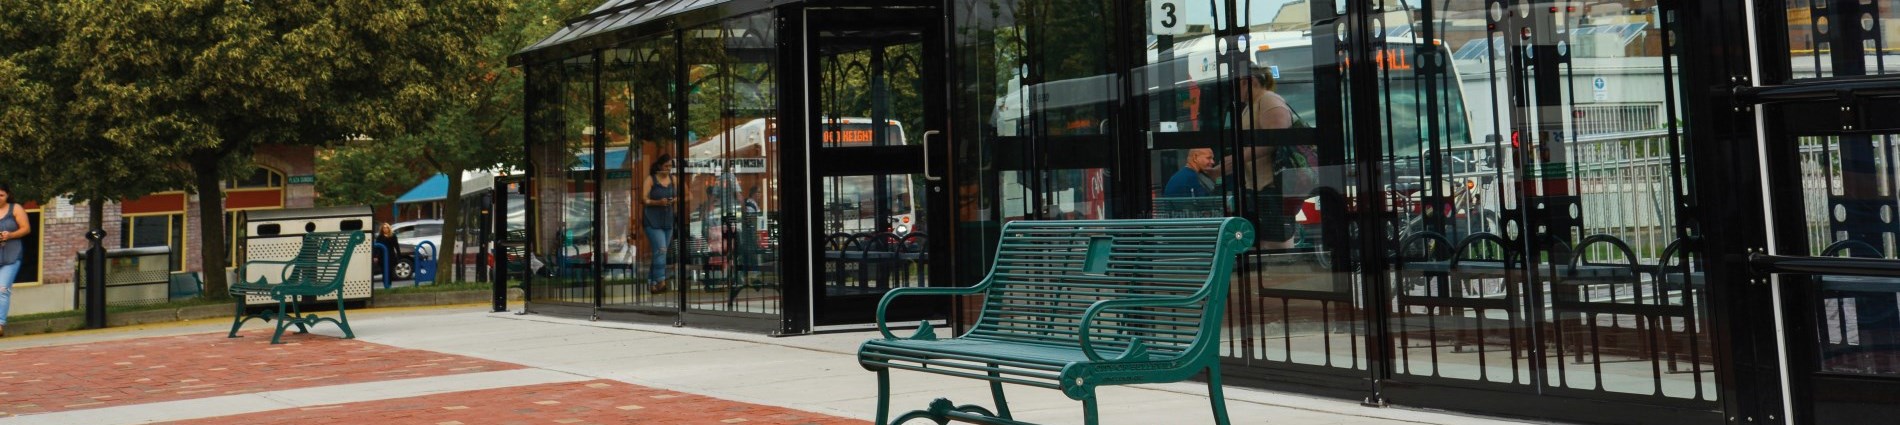 photo of transit terminal with benches